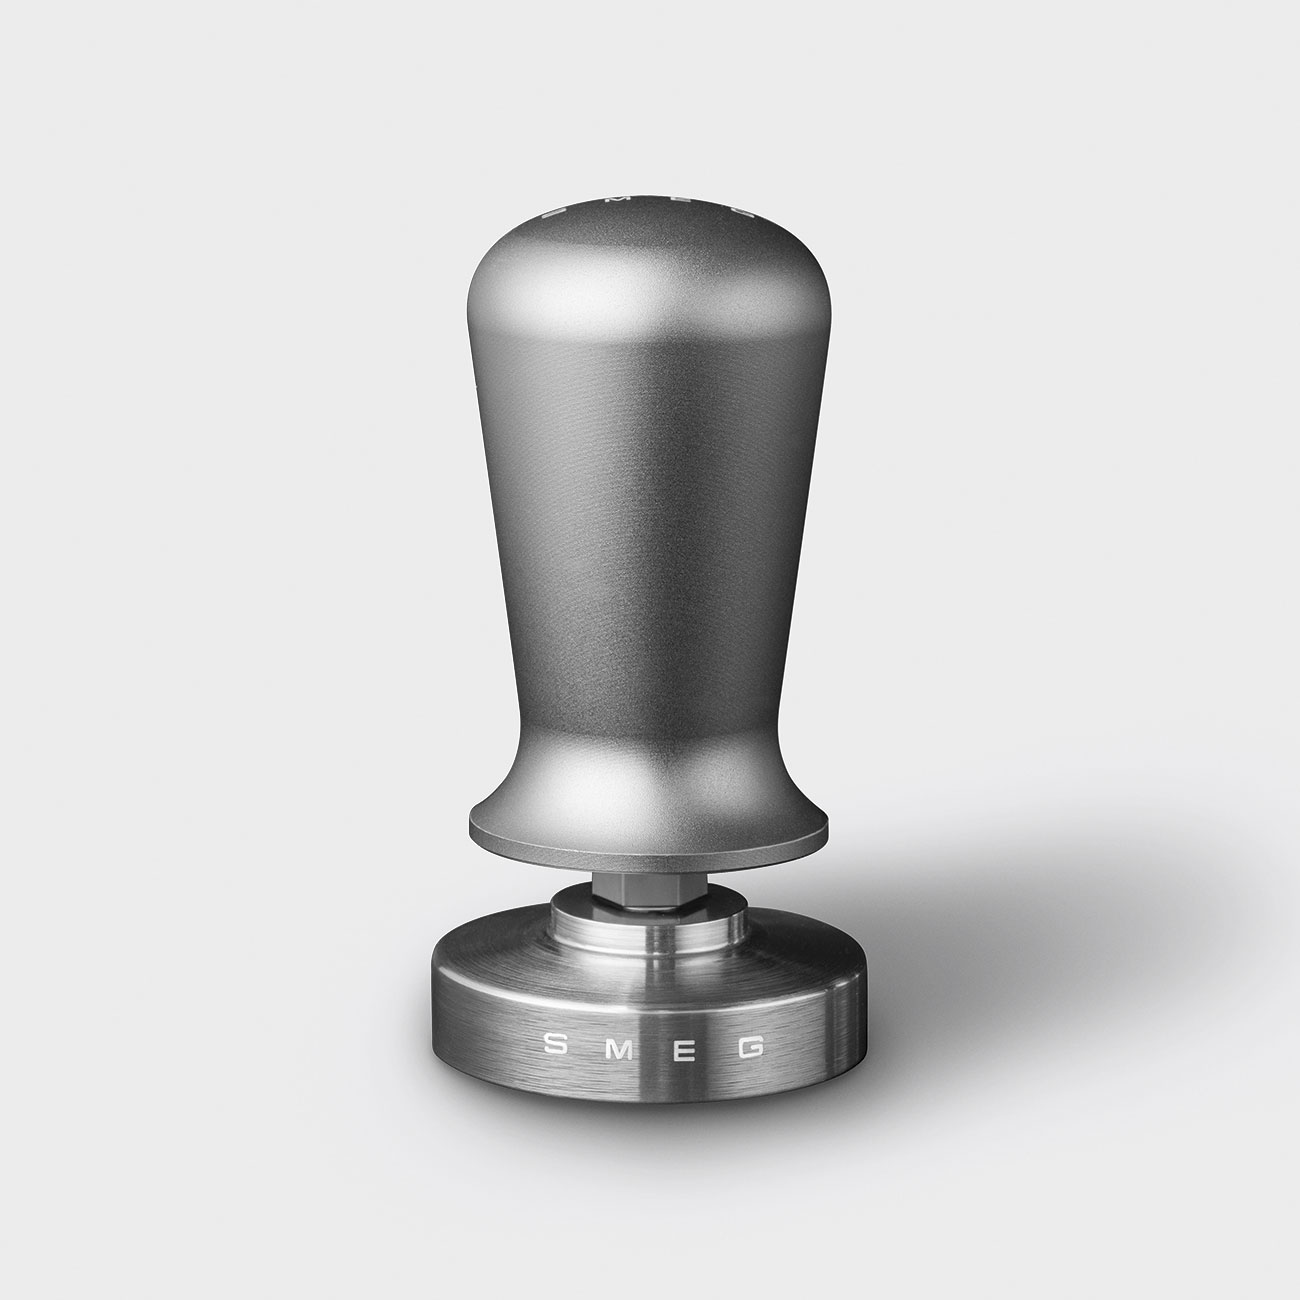 Coffee tamper accessory for Smeg Coffee machines - ECTS01_4